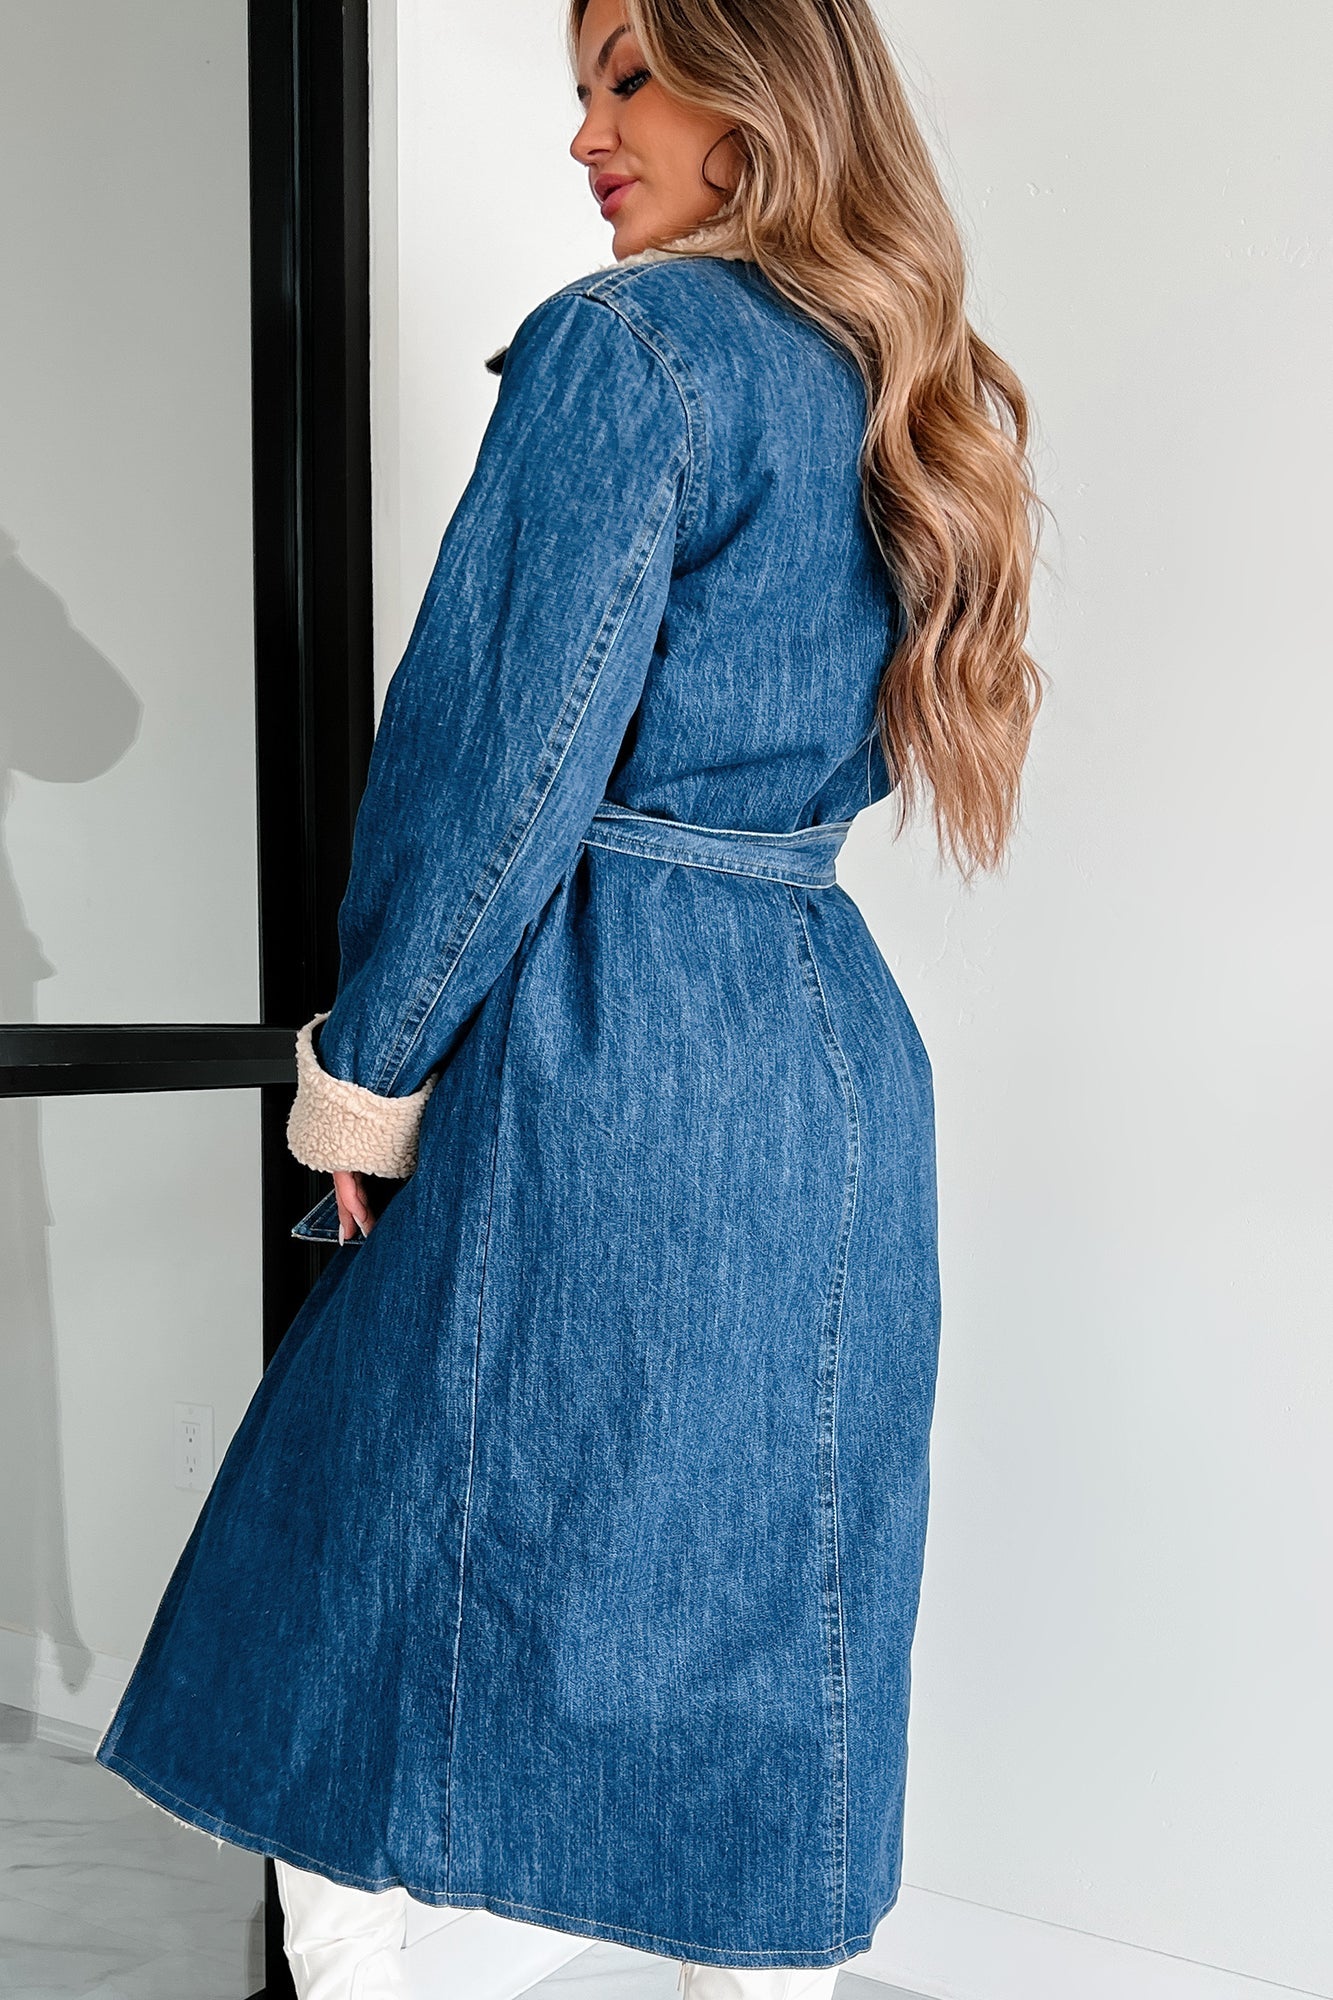 Women's Elegant Collared Quilted Double Pocket Denim Trench Coat